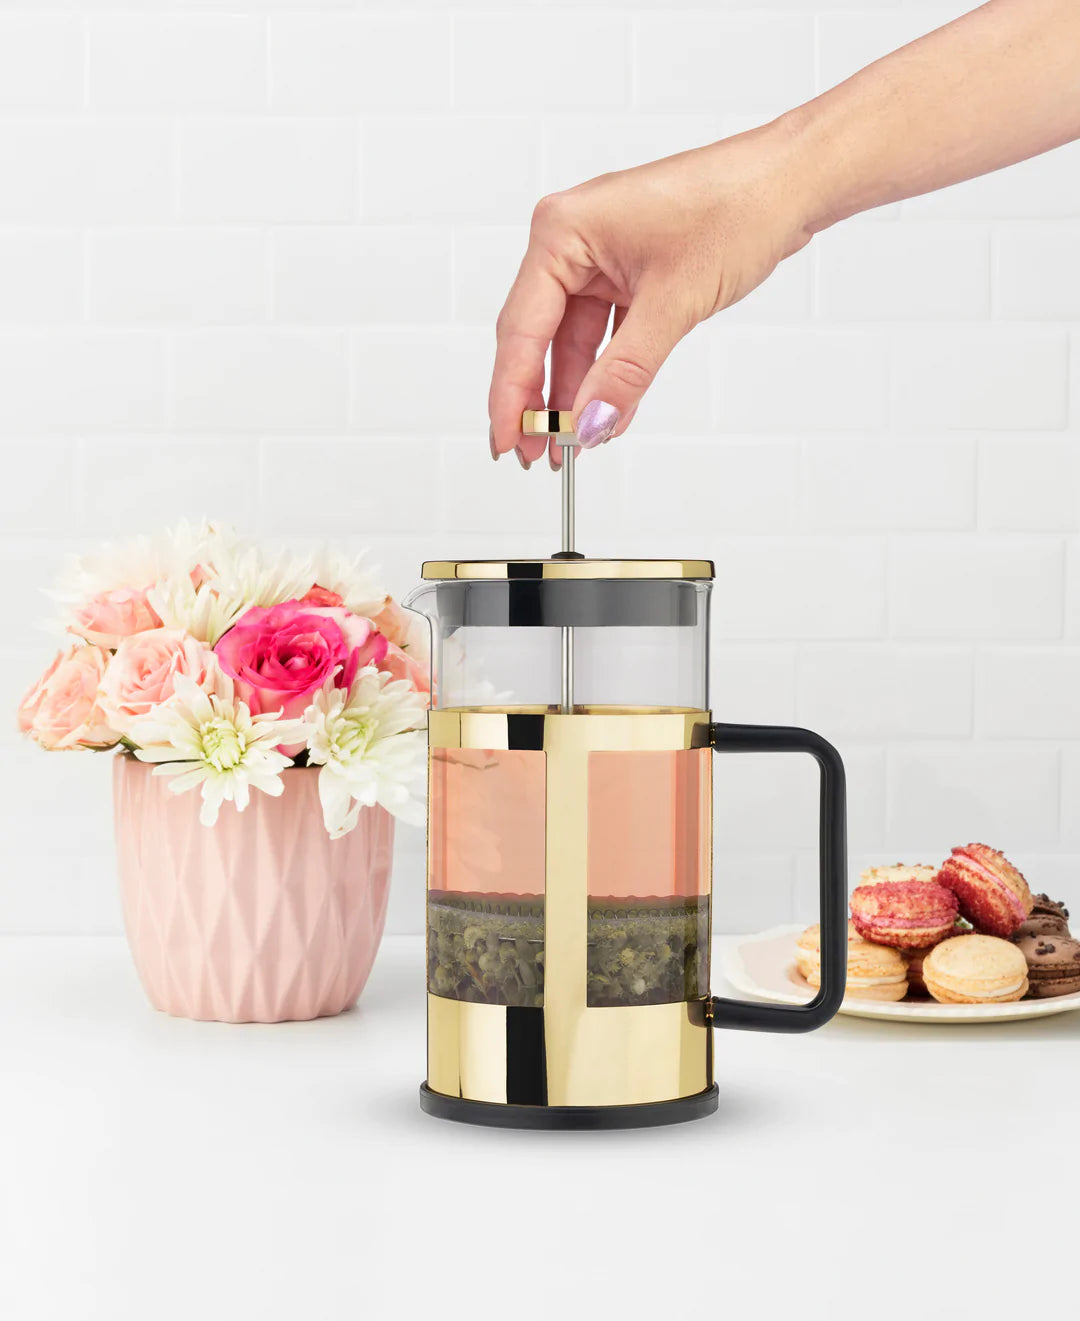 Piper Gold French Press Pot by Pinky Up. Gold french press. Aesthetic french press. Gold kitchen accessory.